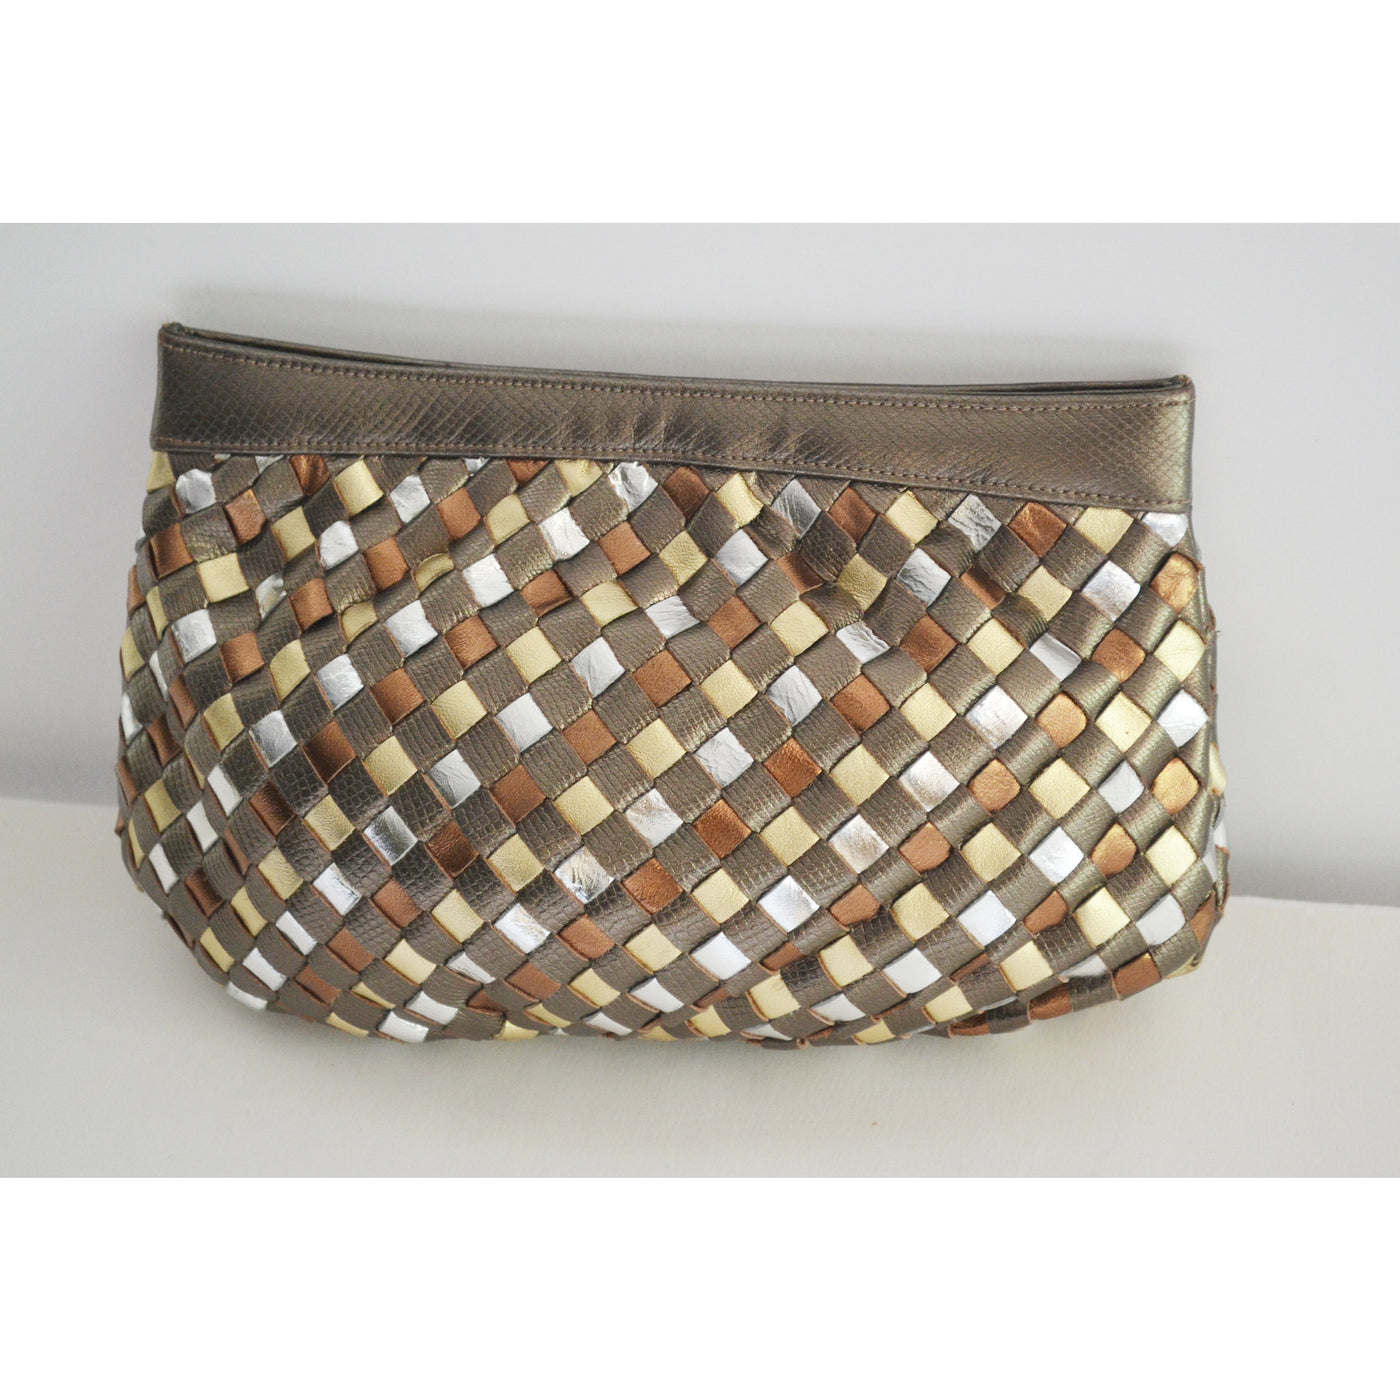 Vintage Metallic Woven Leather Clutch Purse By Sharif